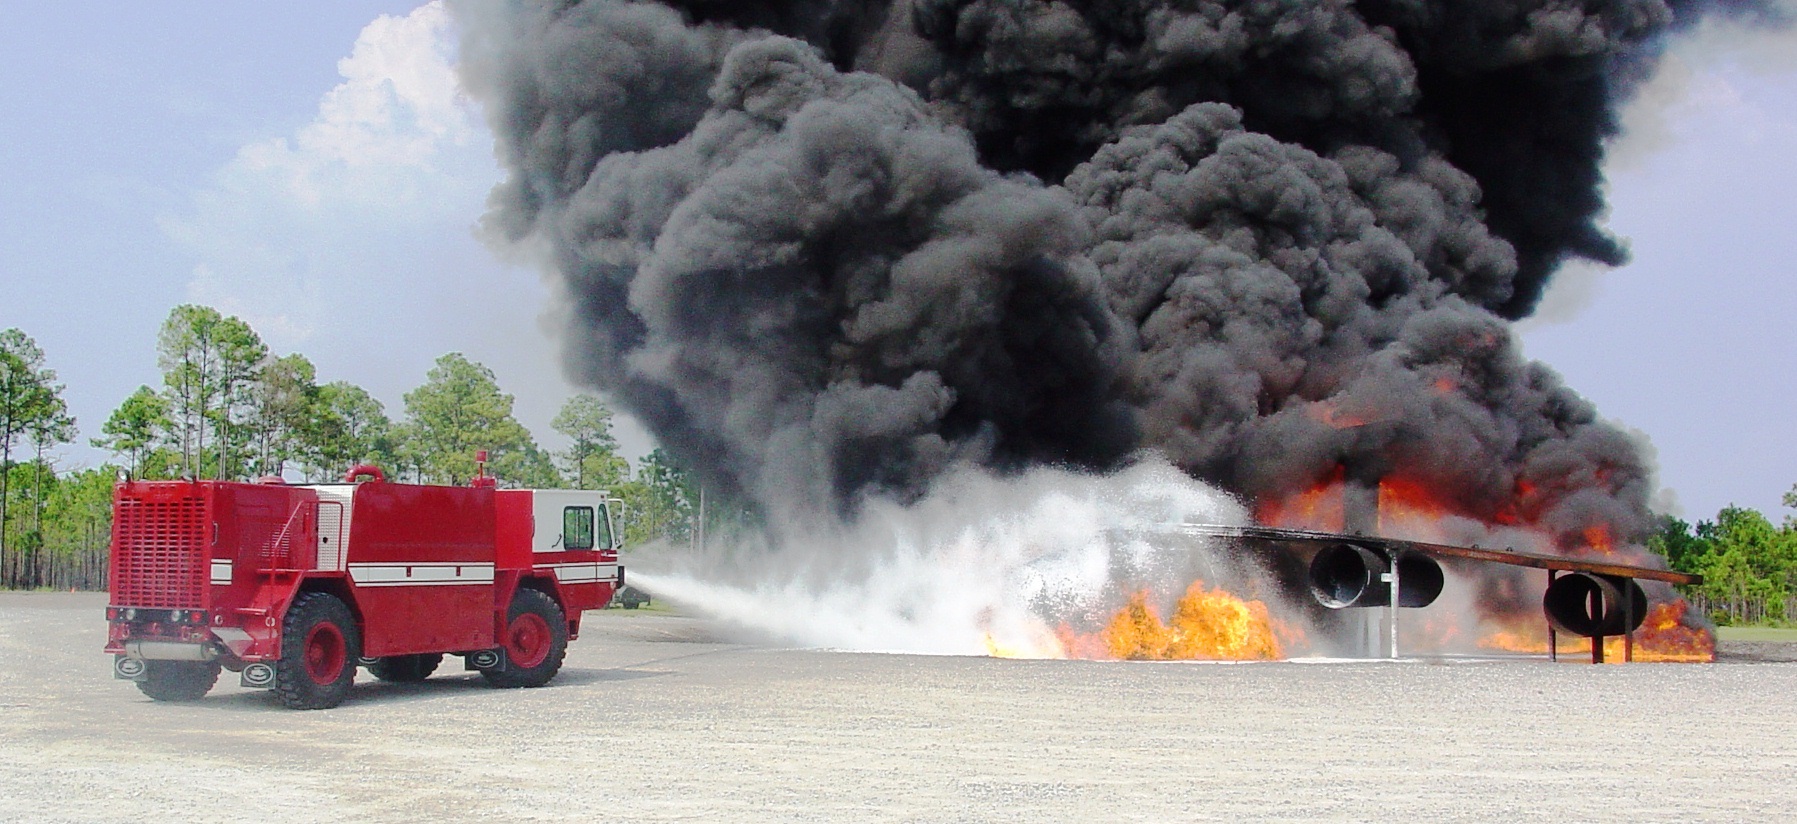 Firefighting vehicle putting out a fire at an aircraft firefighter training site